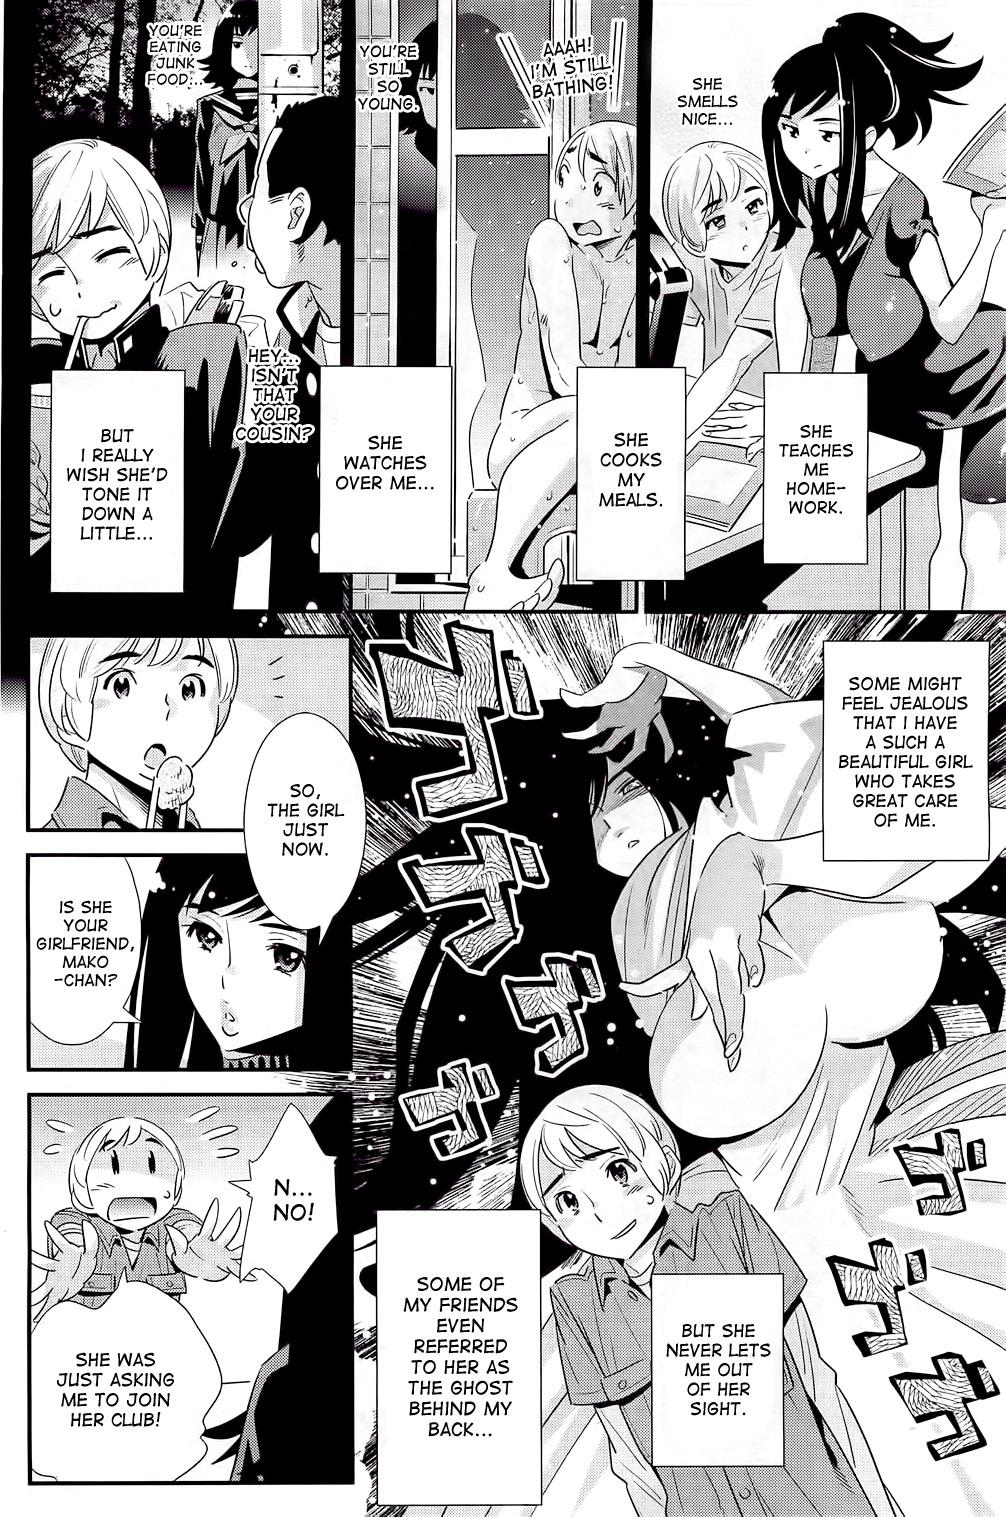 New Boku no Haigorei? | The Ghost Behind My Back? Jacking - Page 4